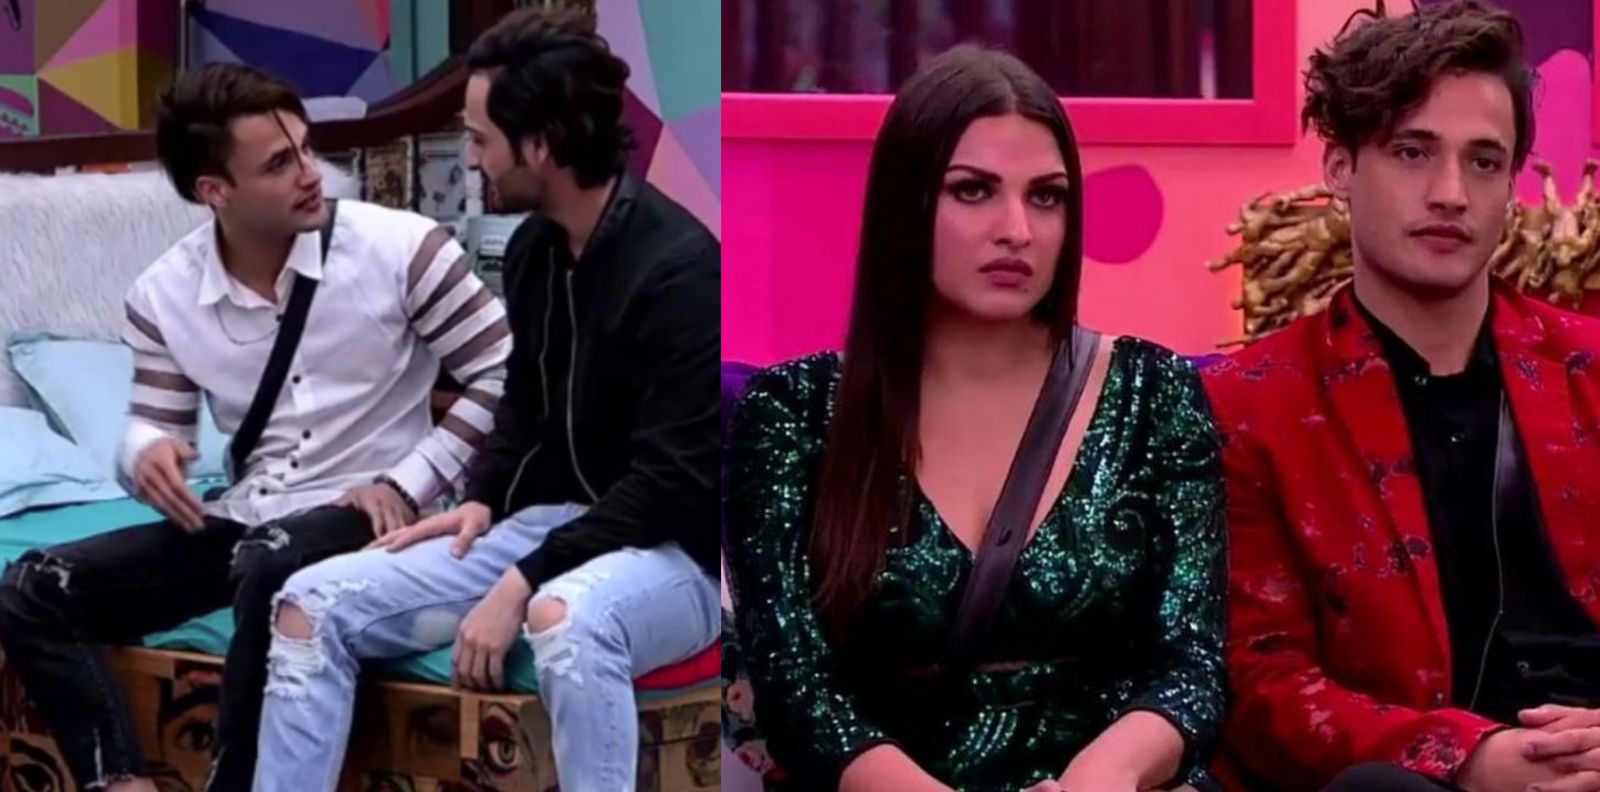 Bigg Boss 13 Preview: Asim Riaz’s Brother Umar To Enter The House, Former Enquires About Himanshi Khurana!